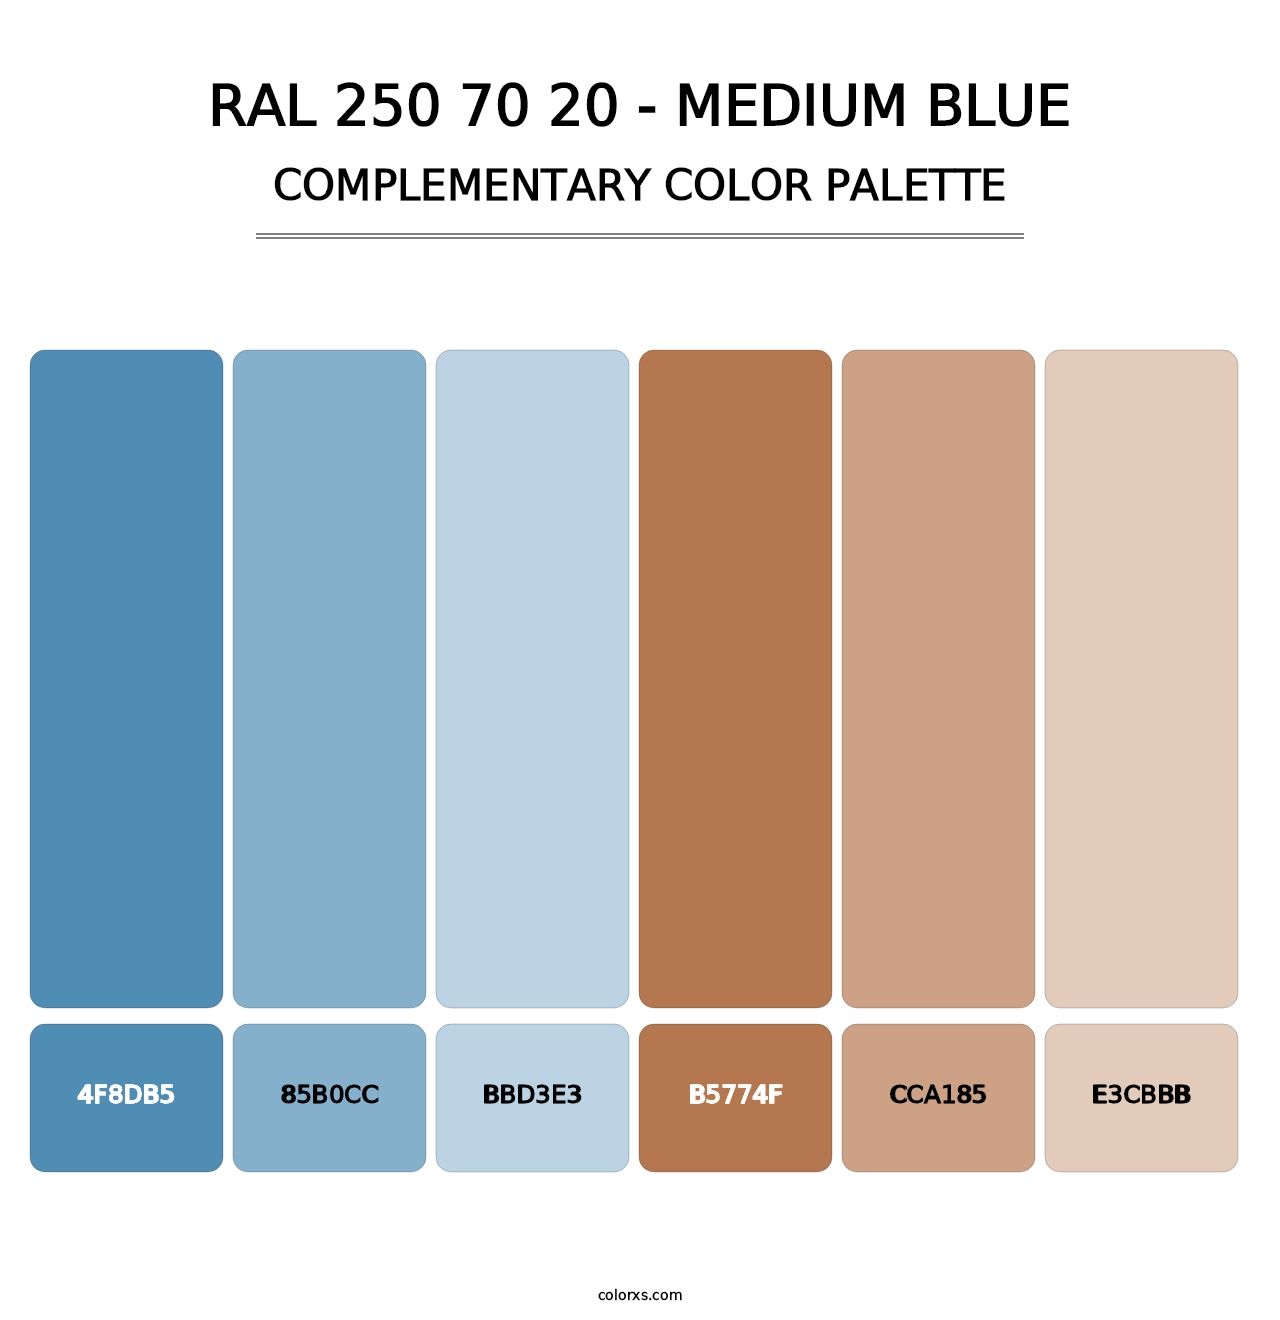 RAL 250 70 20 - Medium Blue - Complementary Color Palette